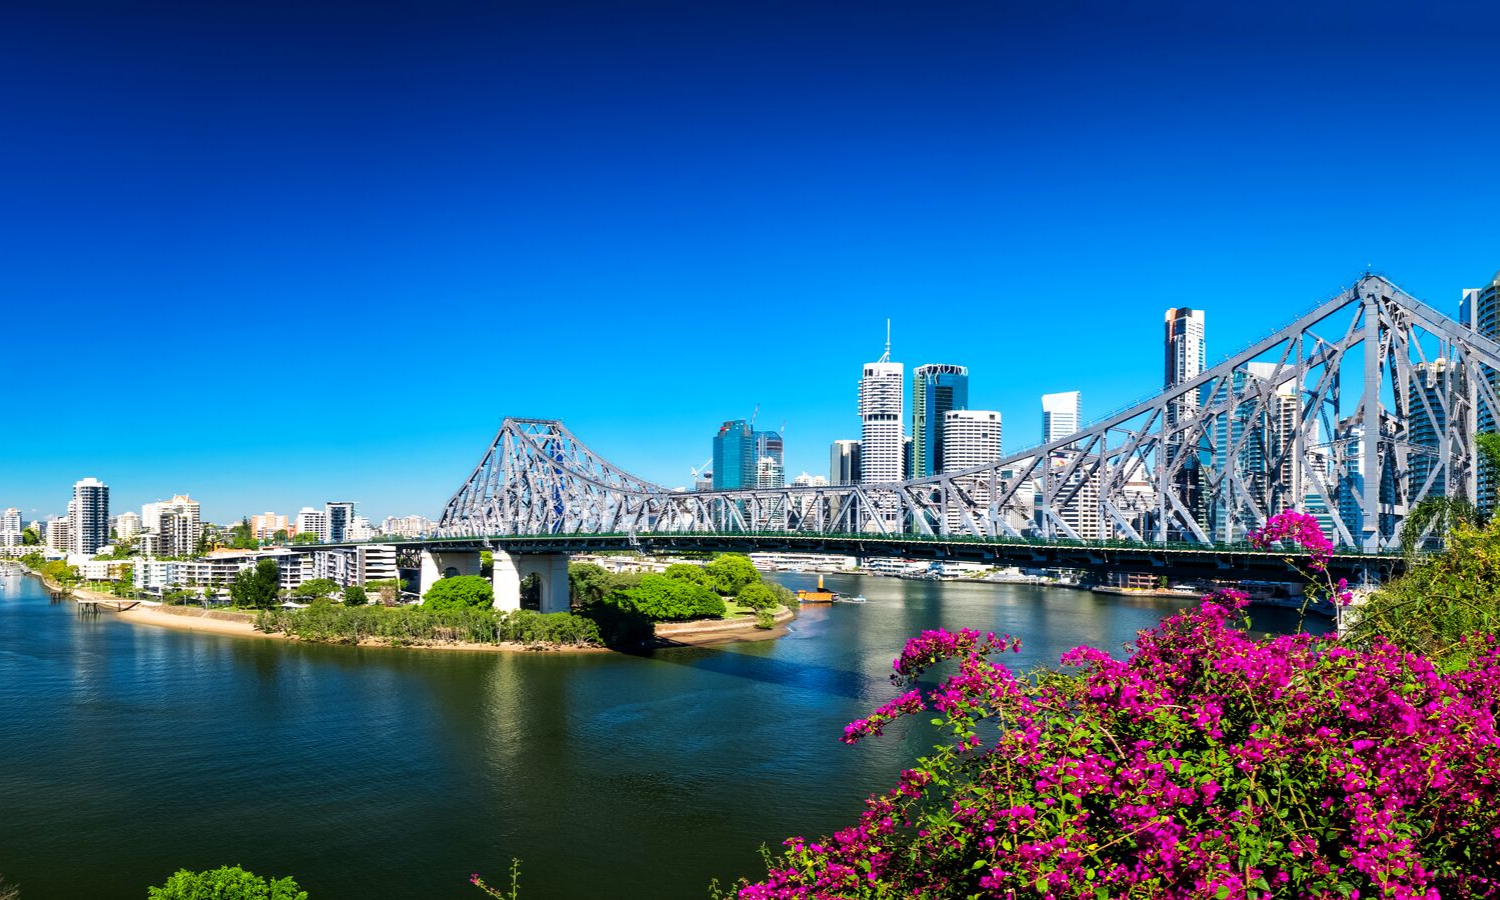 Photograph of Story Bridge, Brisbane. Shows suspension bridge over water with city scape in the background. In the forefront there are some pink flowering plants. 